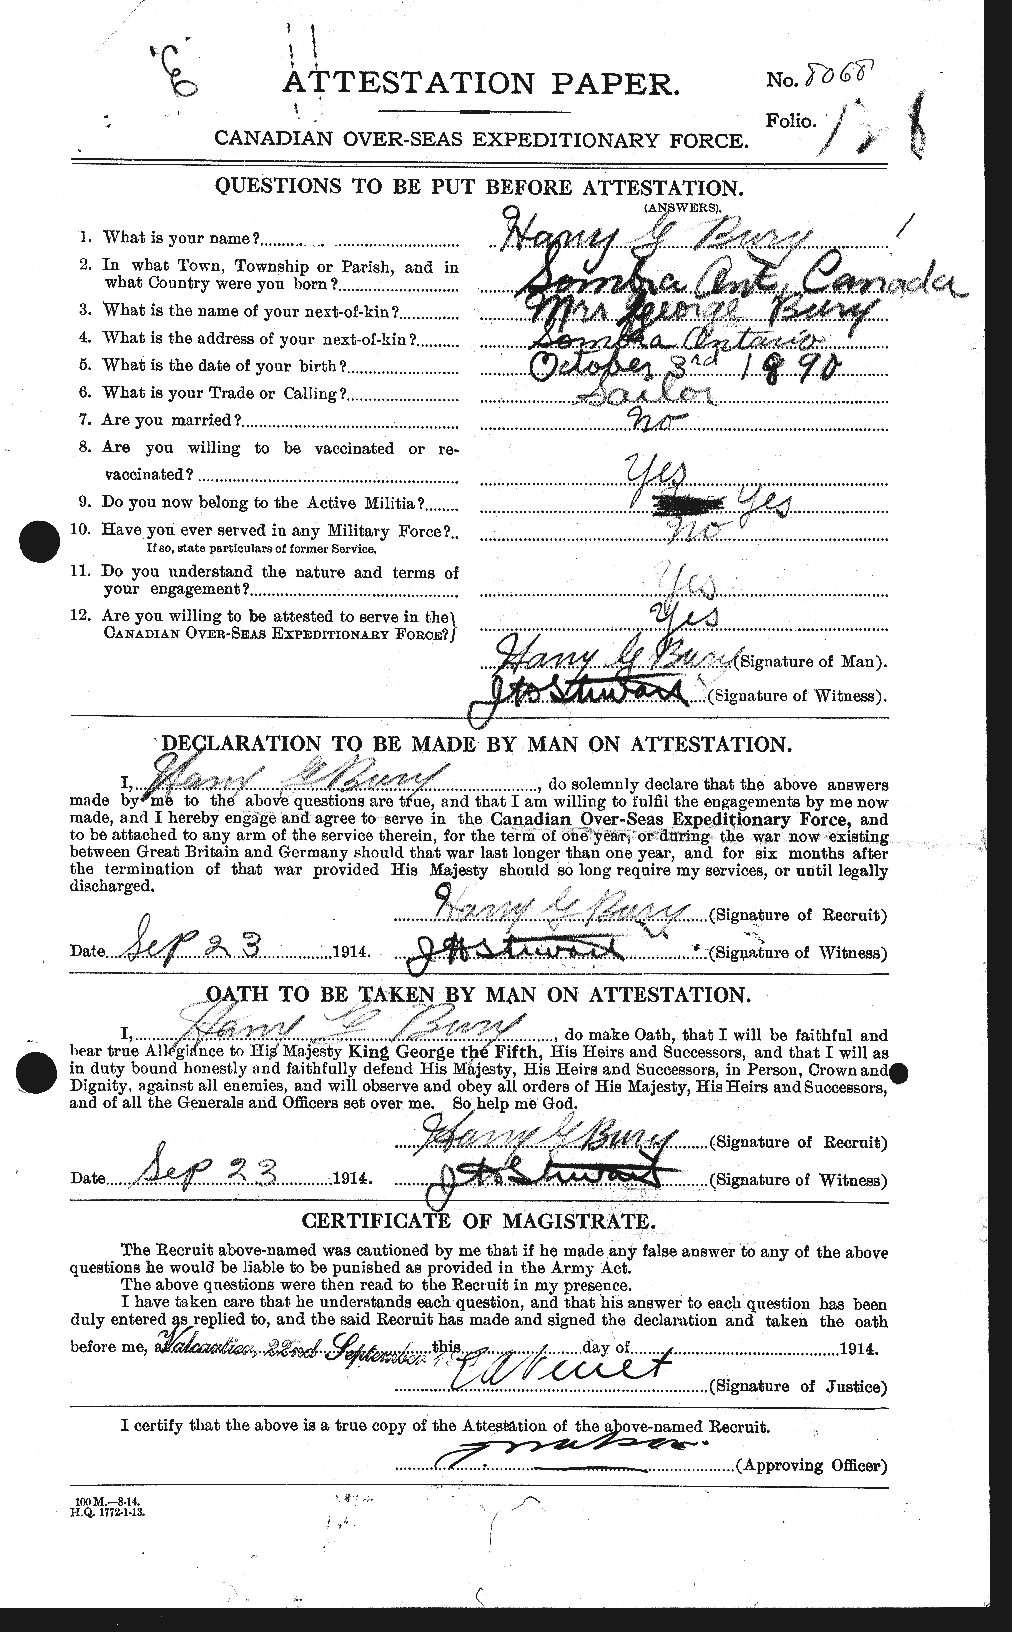 Personnel Records of the First World War - CEF 272839a